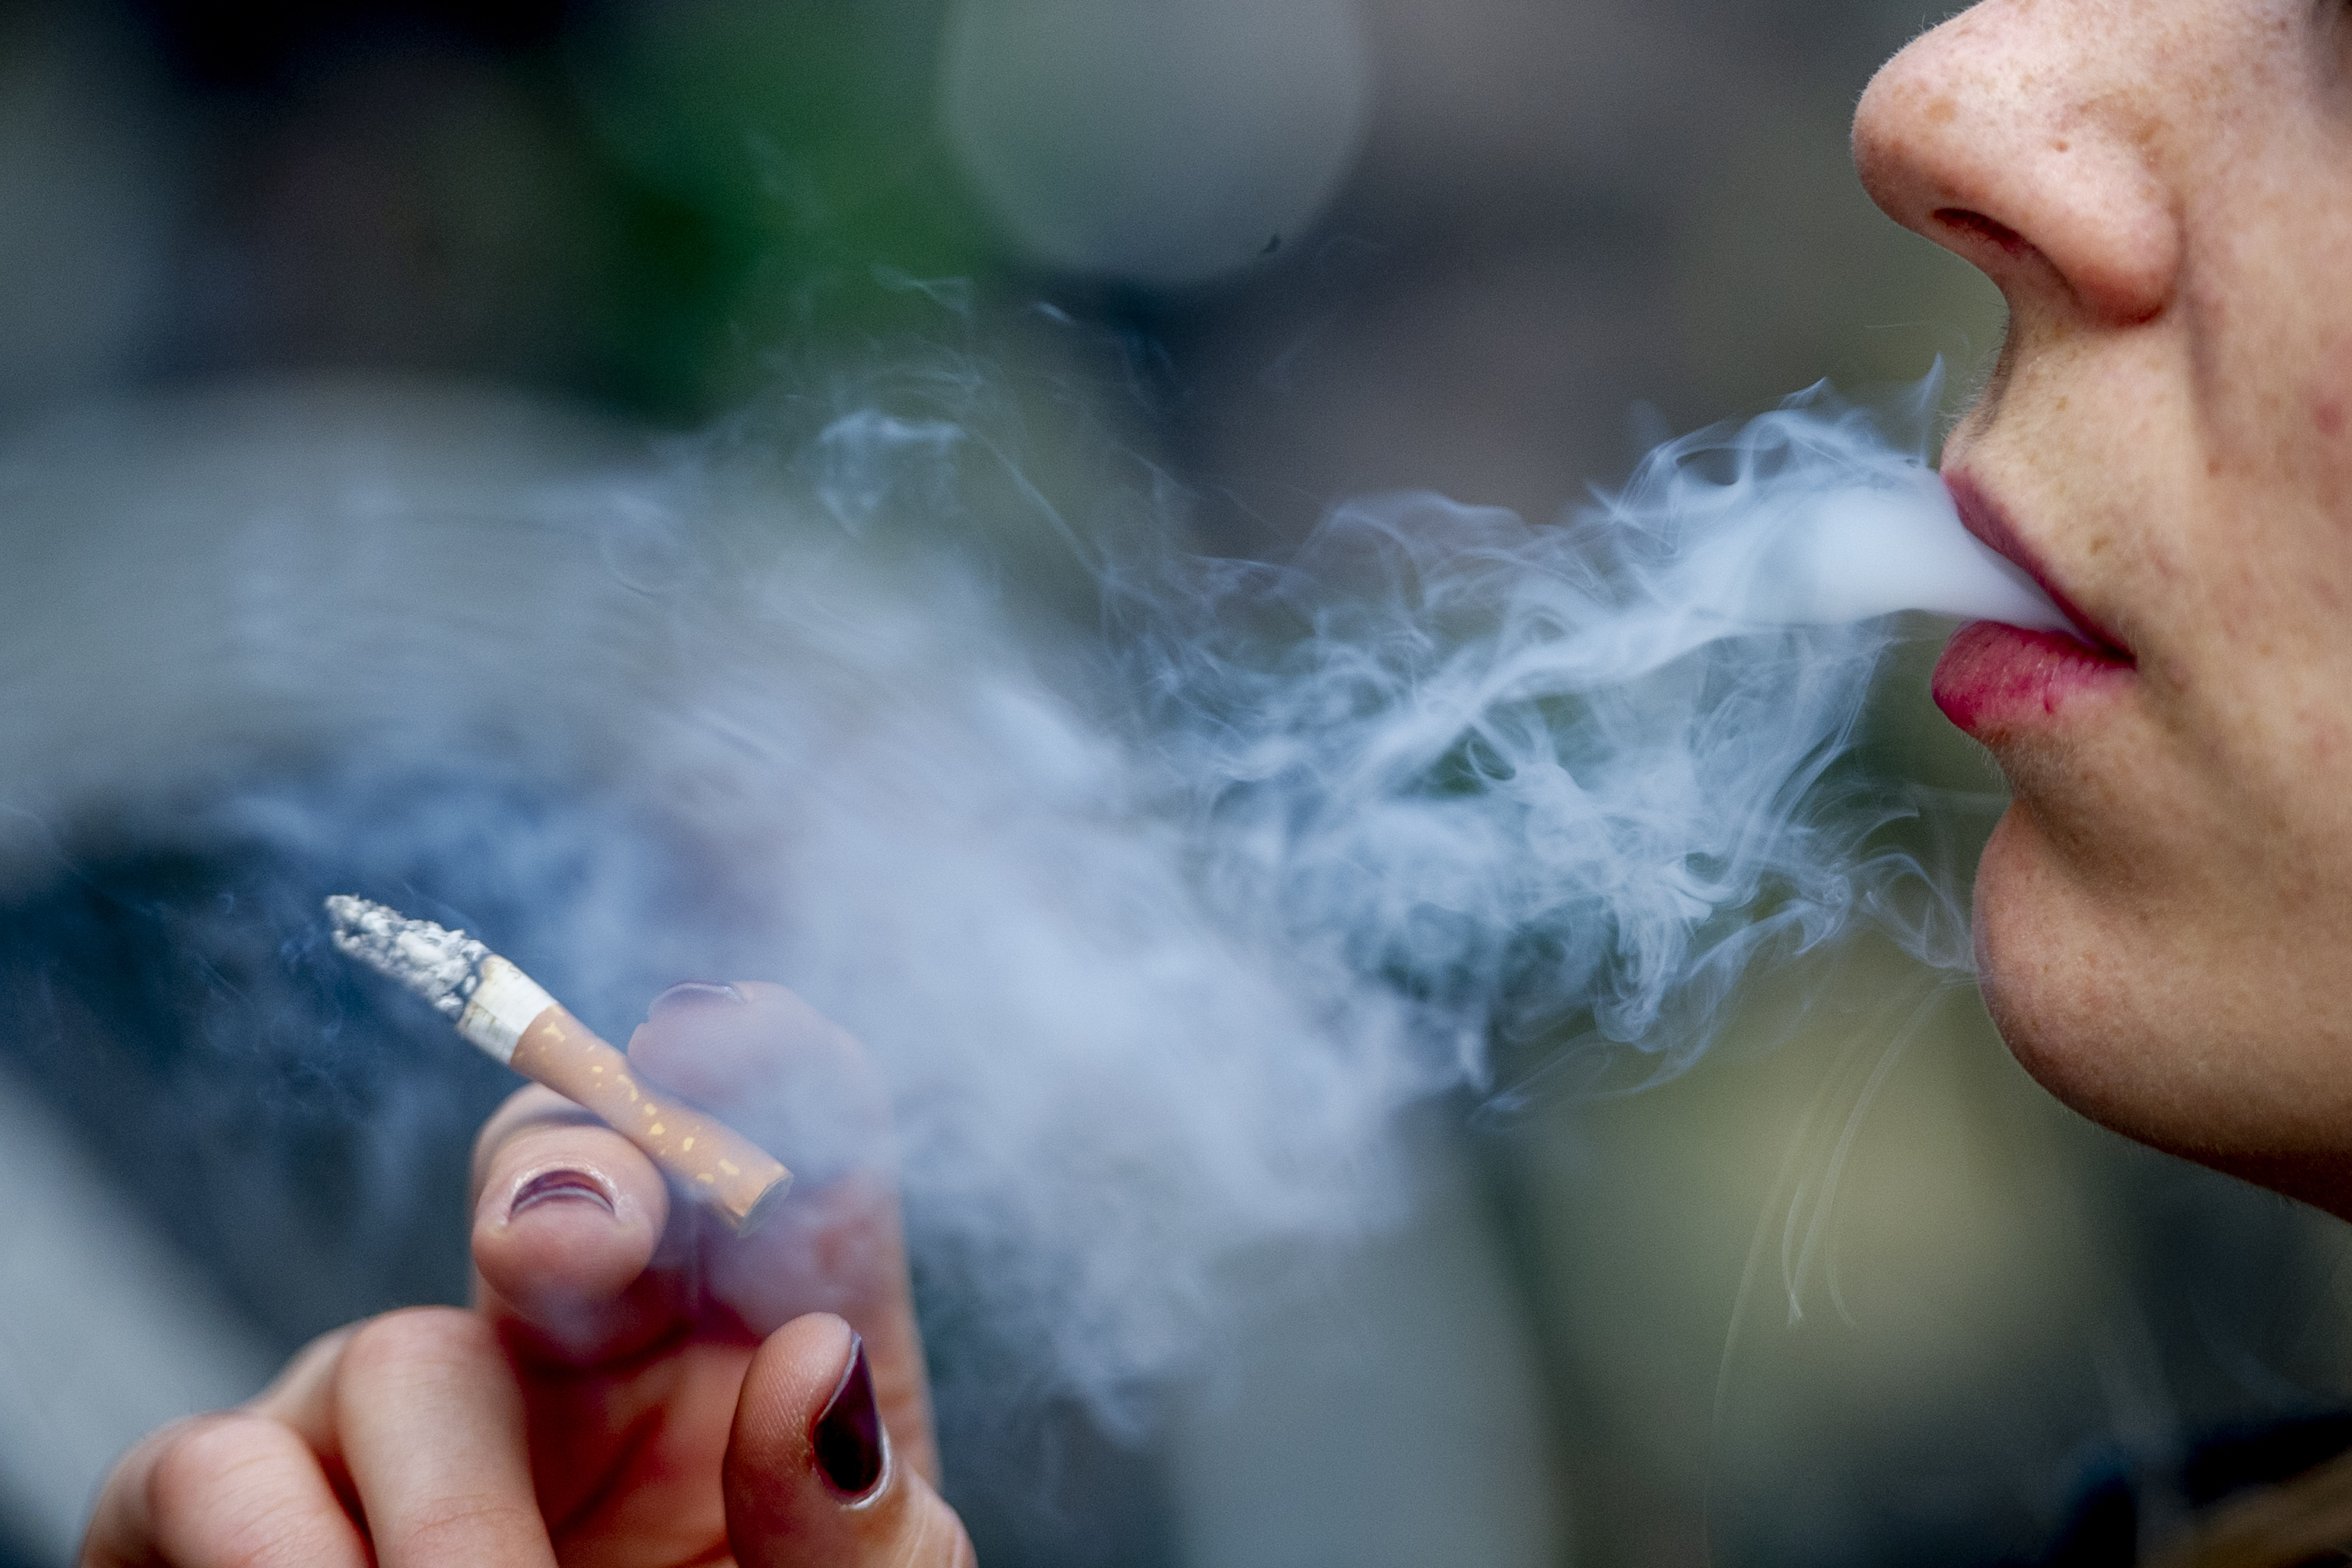 US regulators are reportedly planning to ban menthol cigarettes.